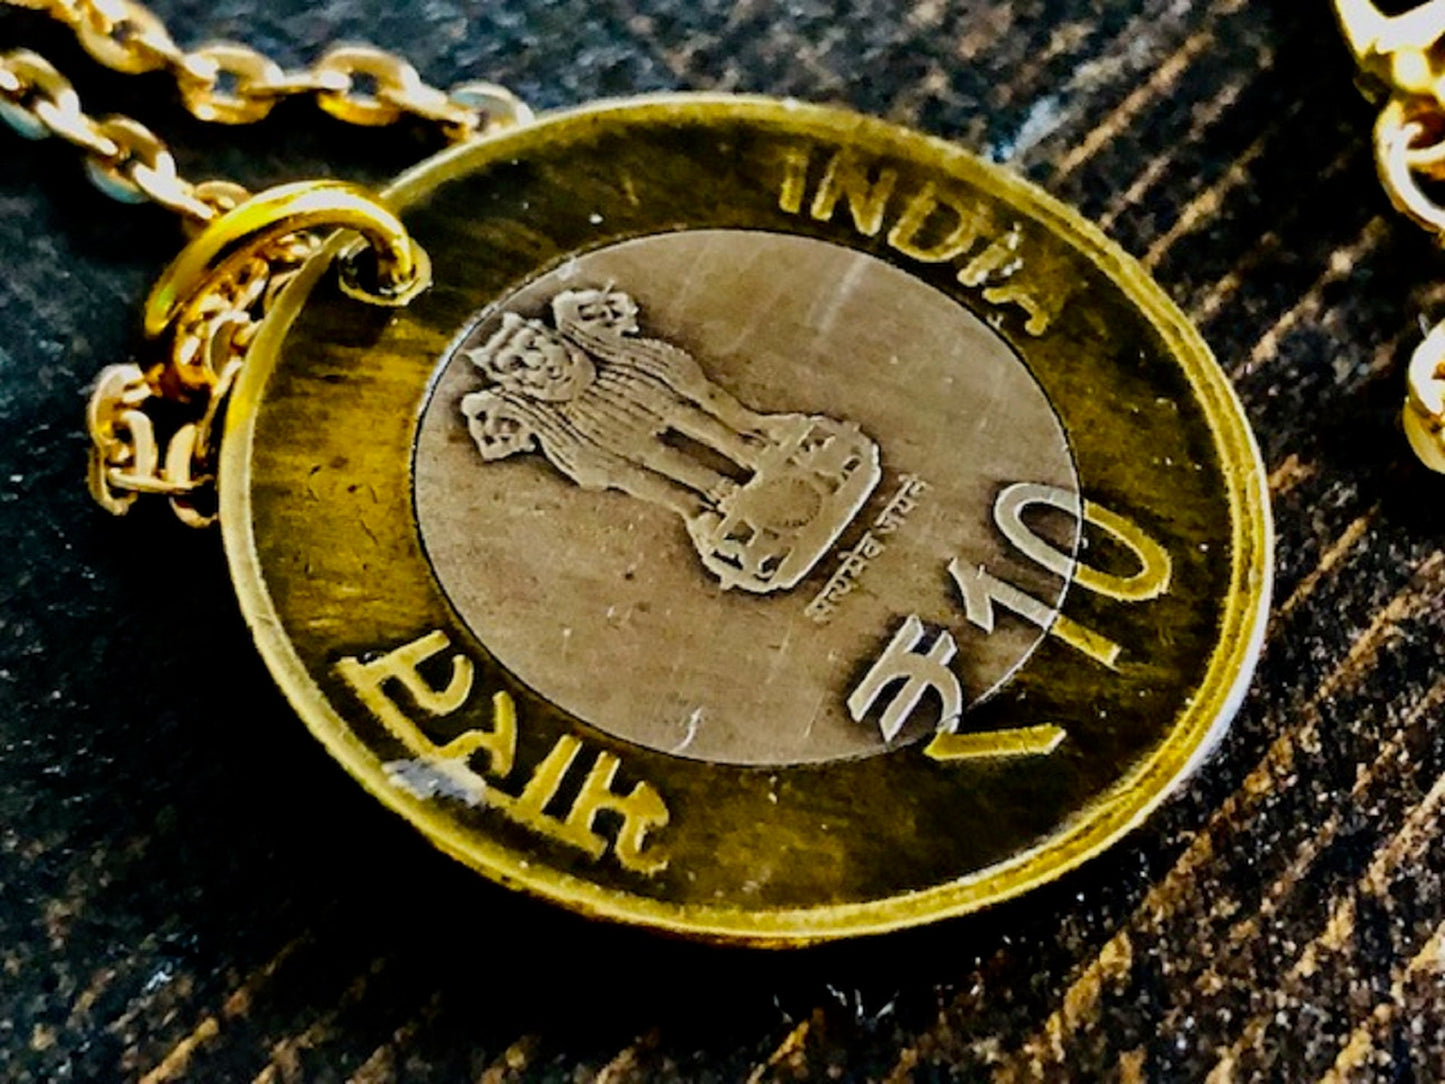 India Coin Necklace 10 Rupees Bank of India Yoga Indian East India Coin Pendant Vintage Rare Coins Coin Enthusiast Handmade